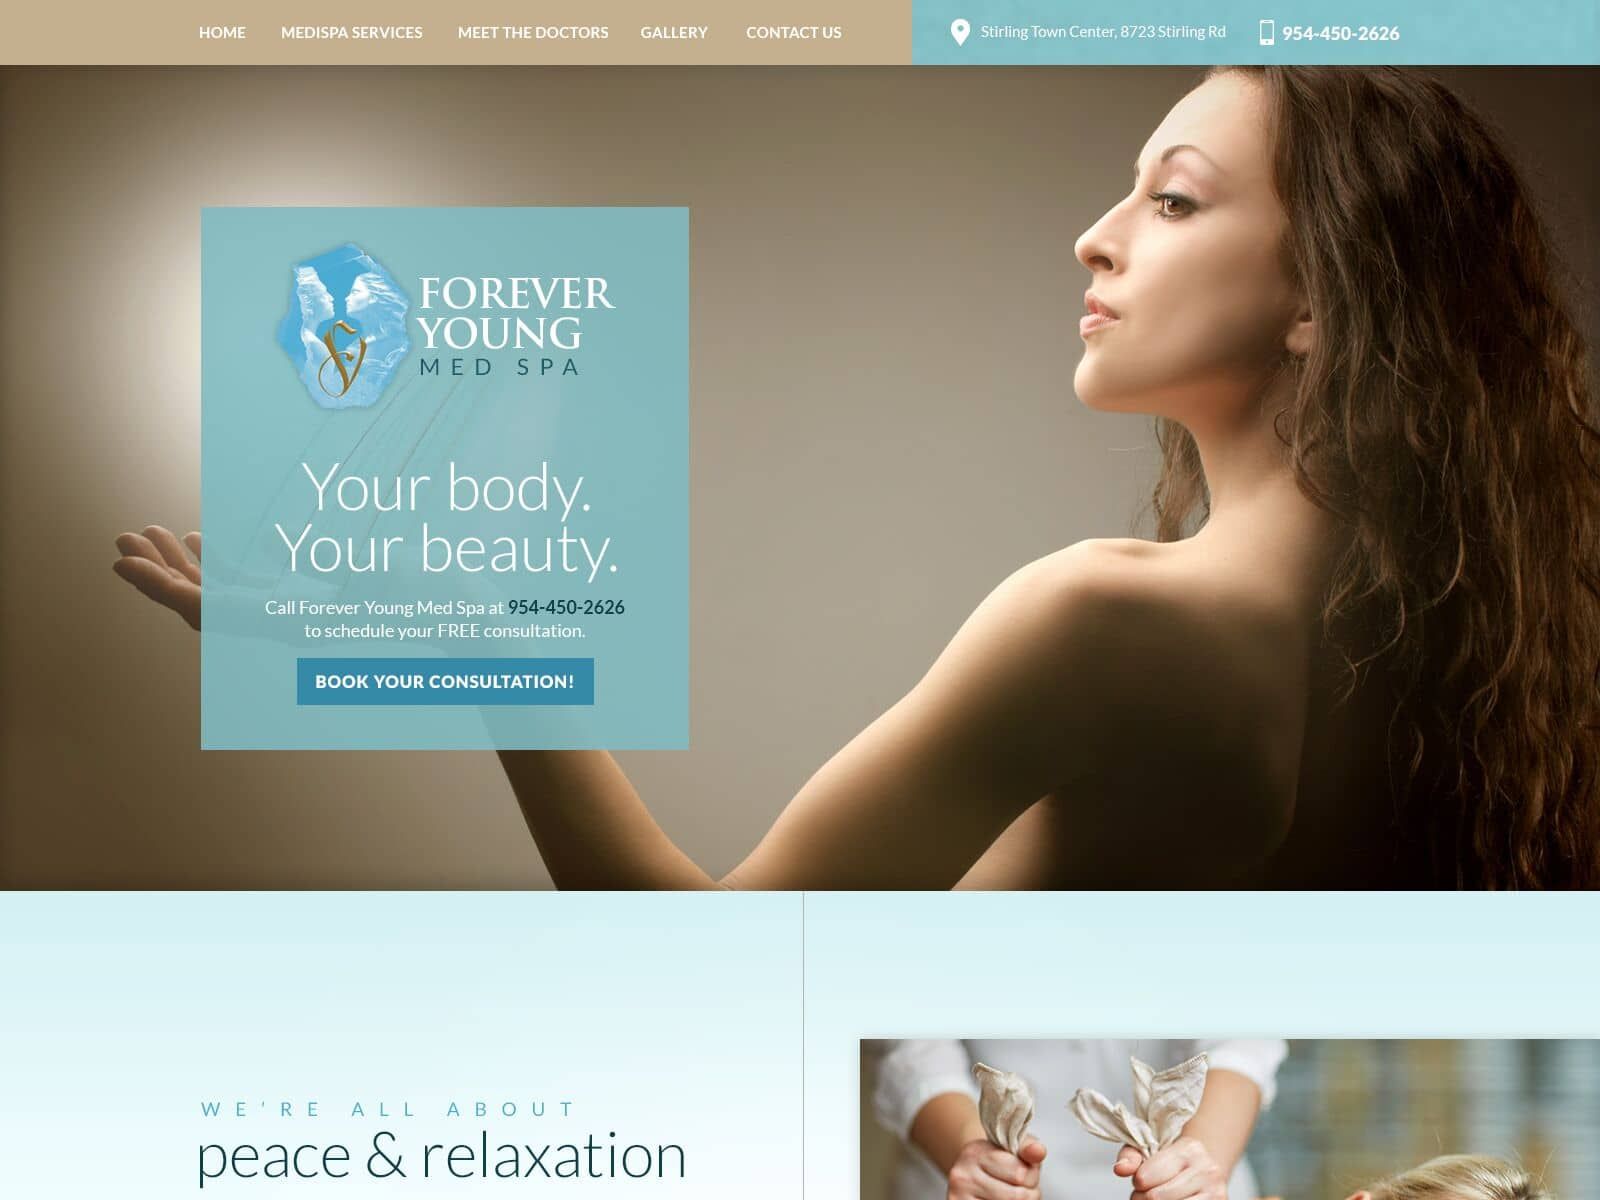 Forever Young Full Page Medical Spa Website 1600x1200 1600x1200